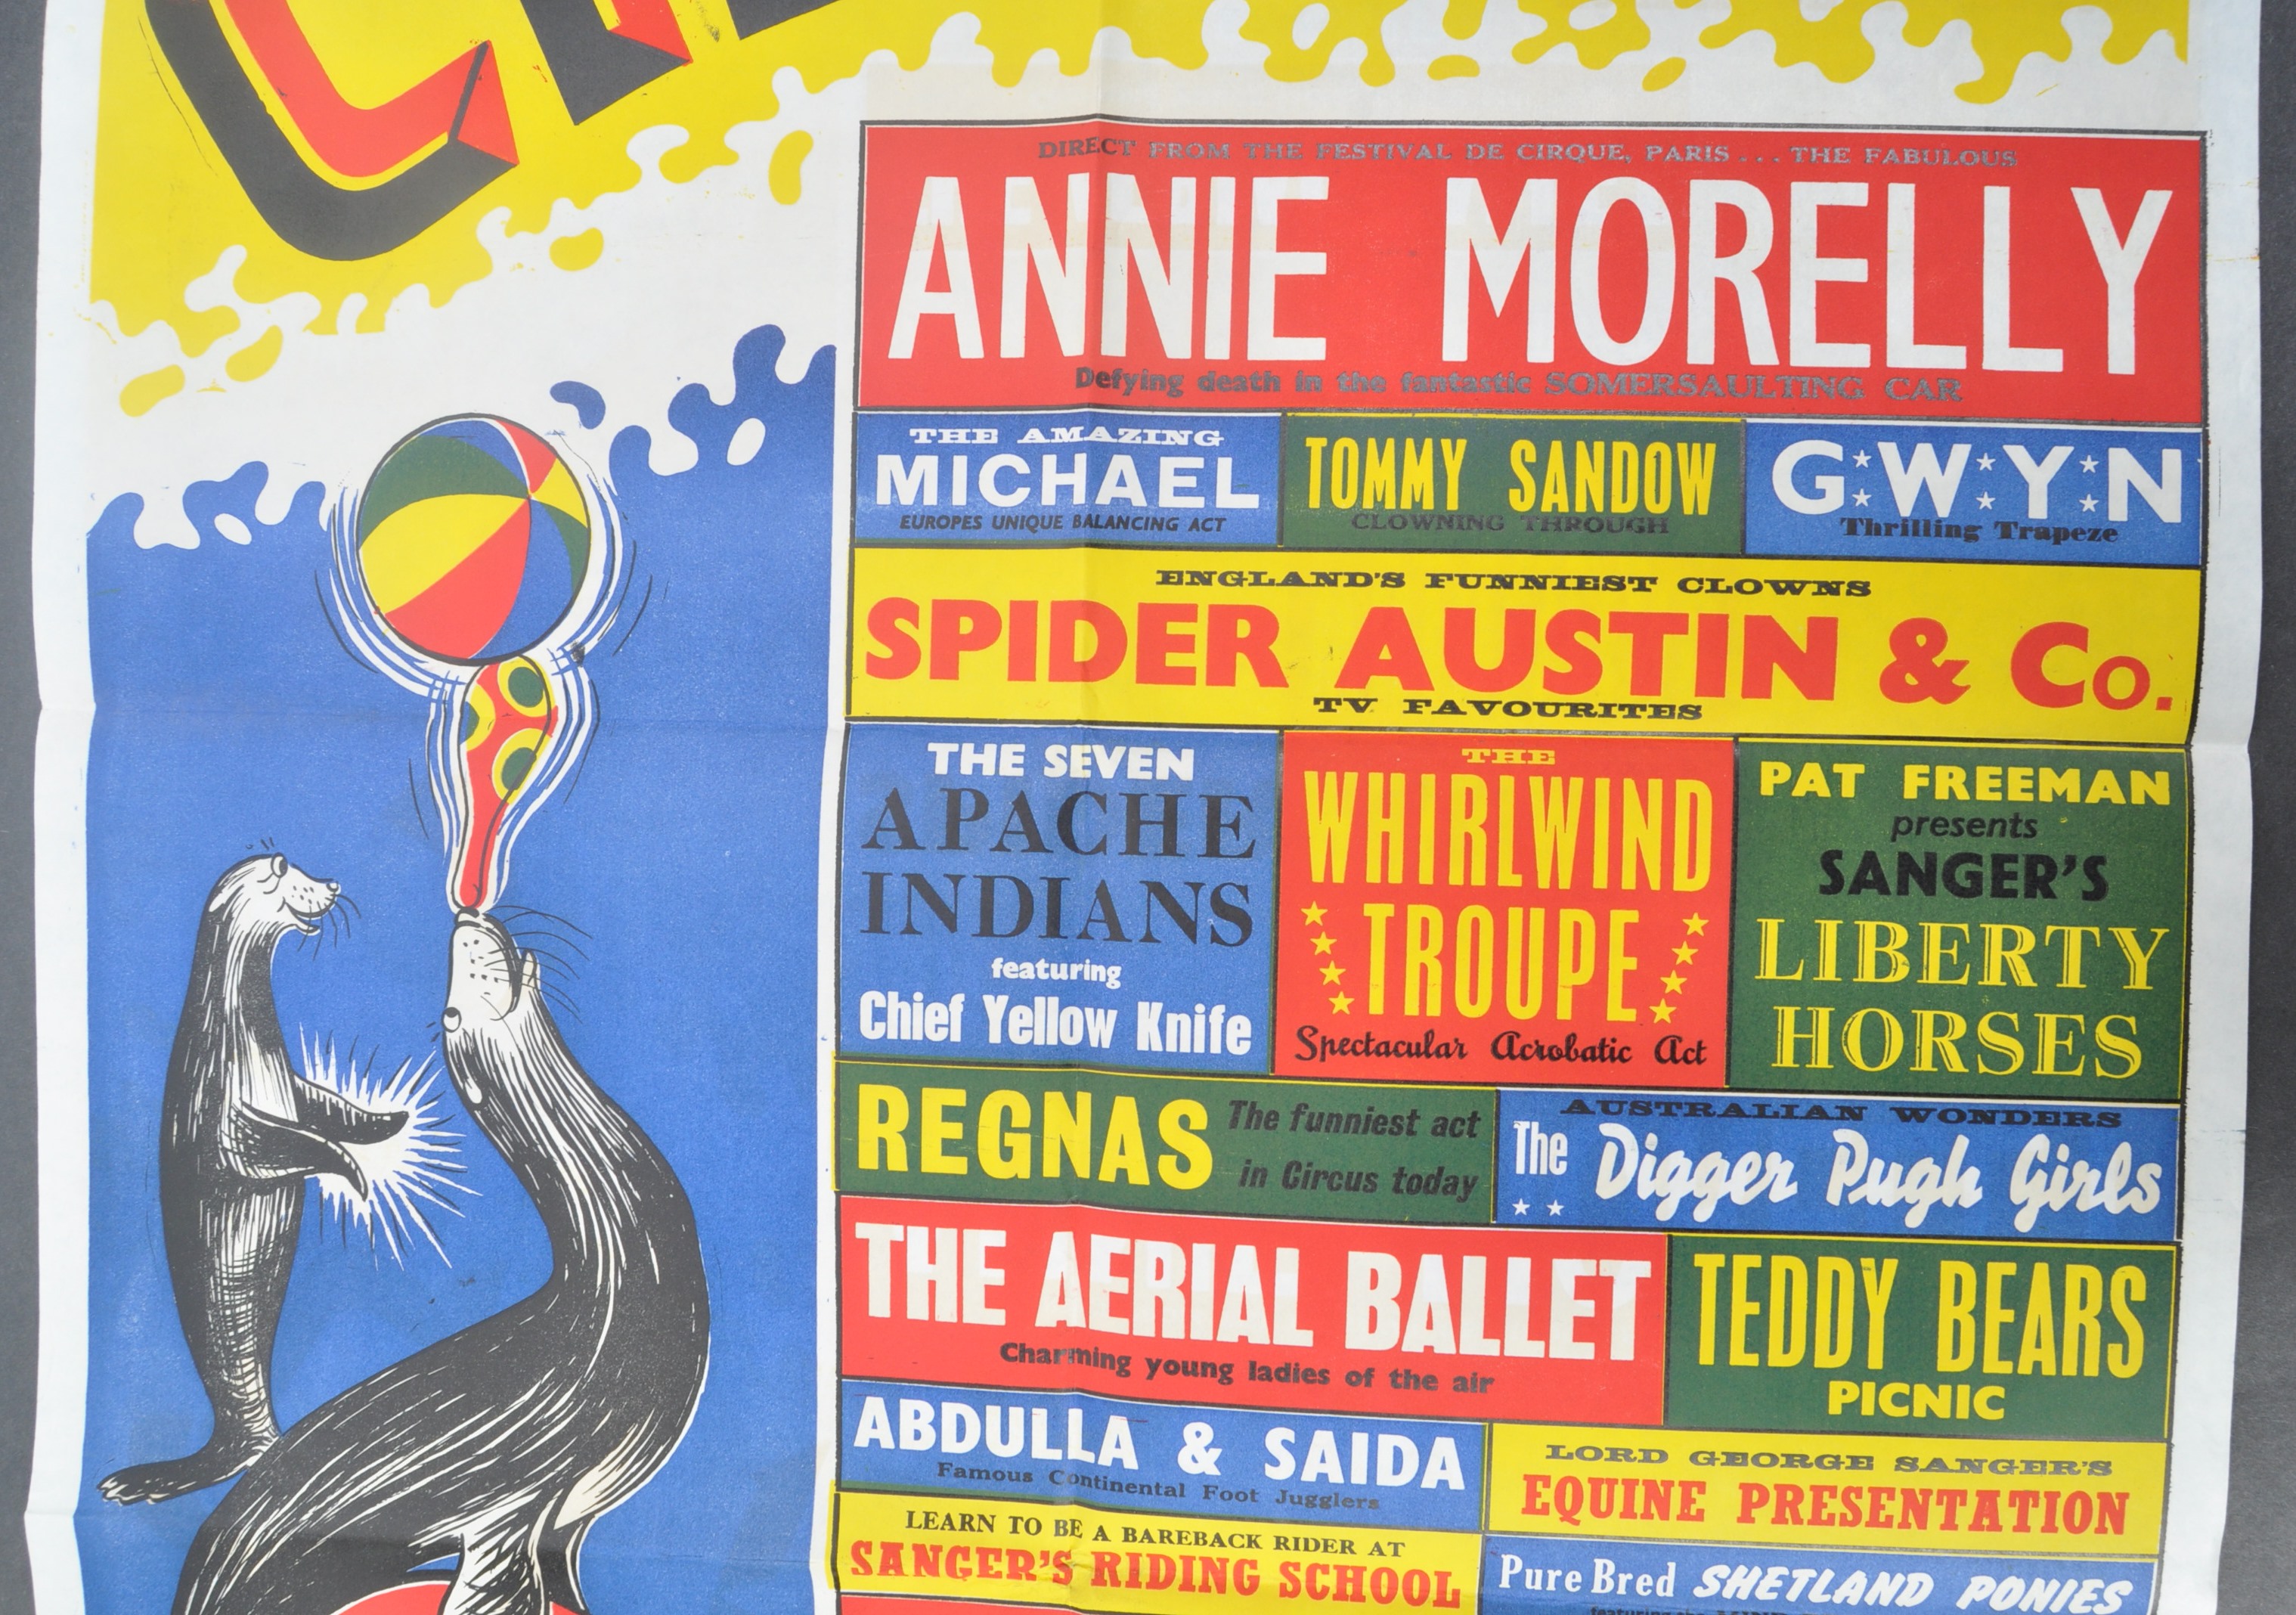 LORD GEORGE SANGER'S CIRCUS - ORIGINAL 1960S ADVERTISING POSTER - Image 3 of 4